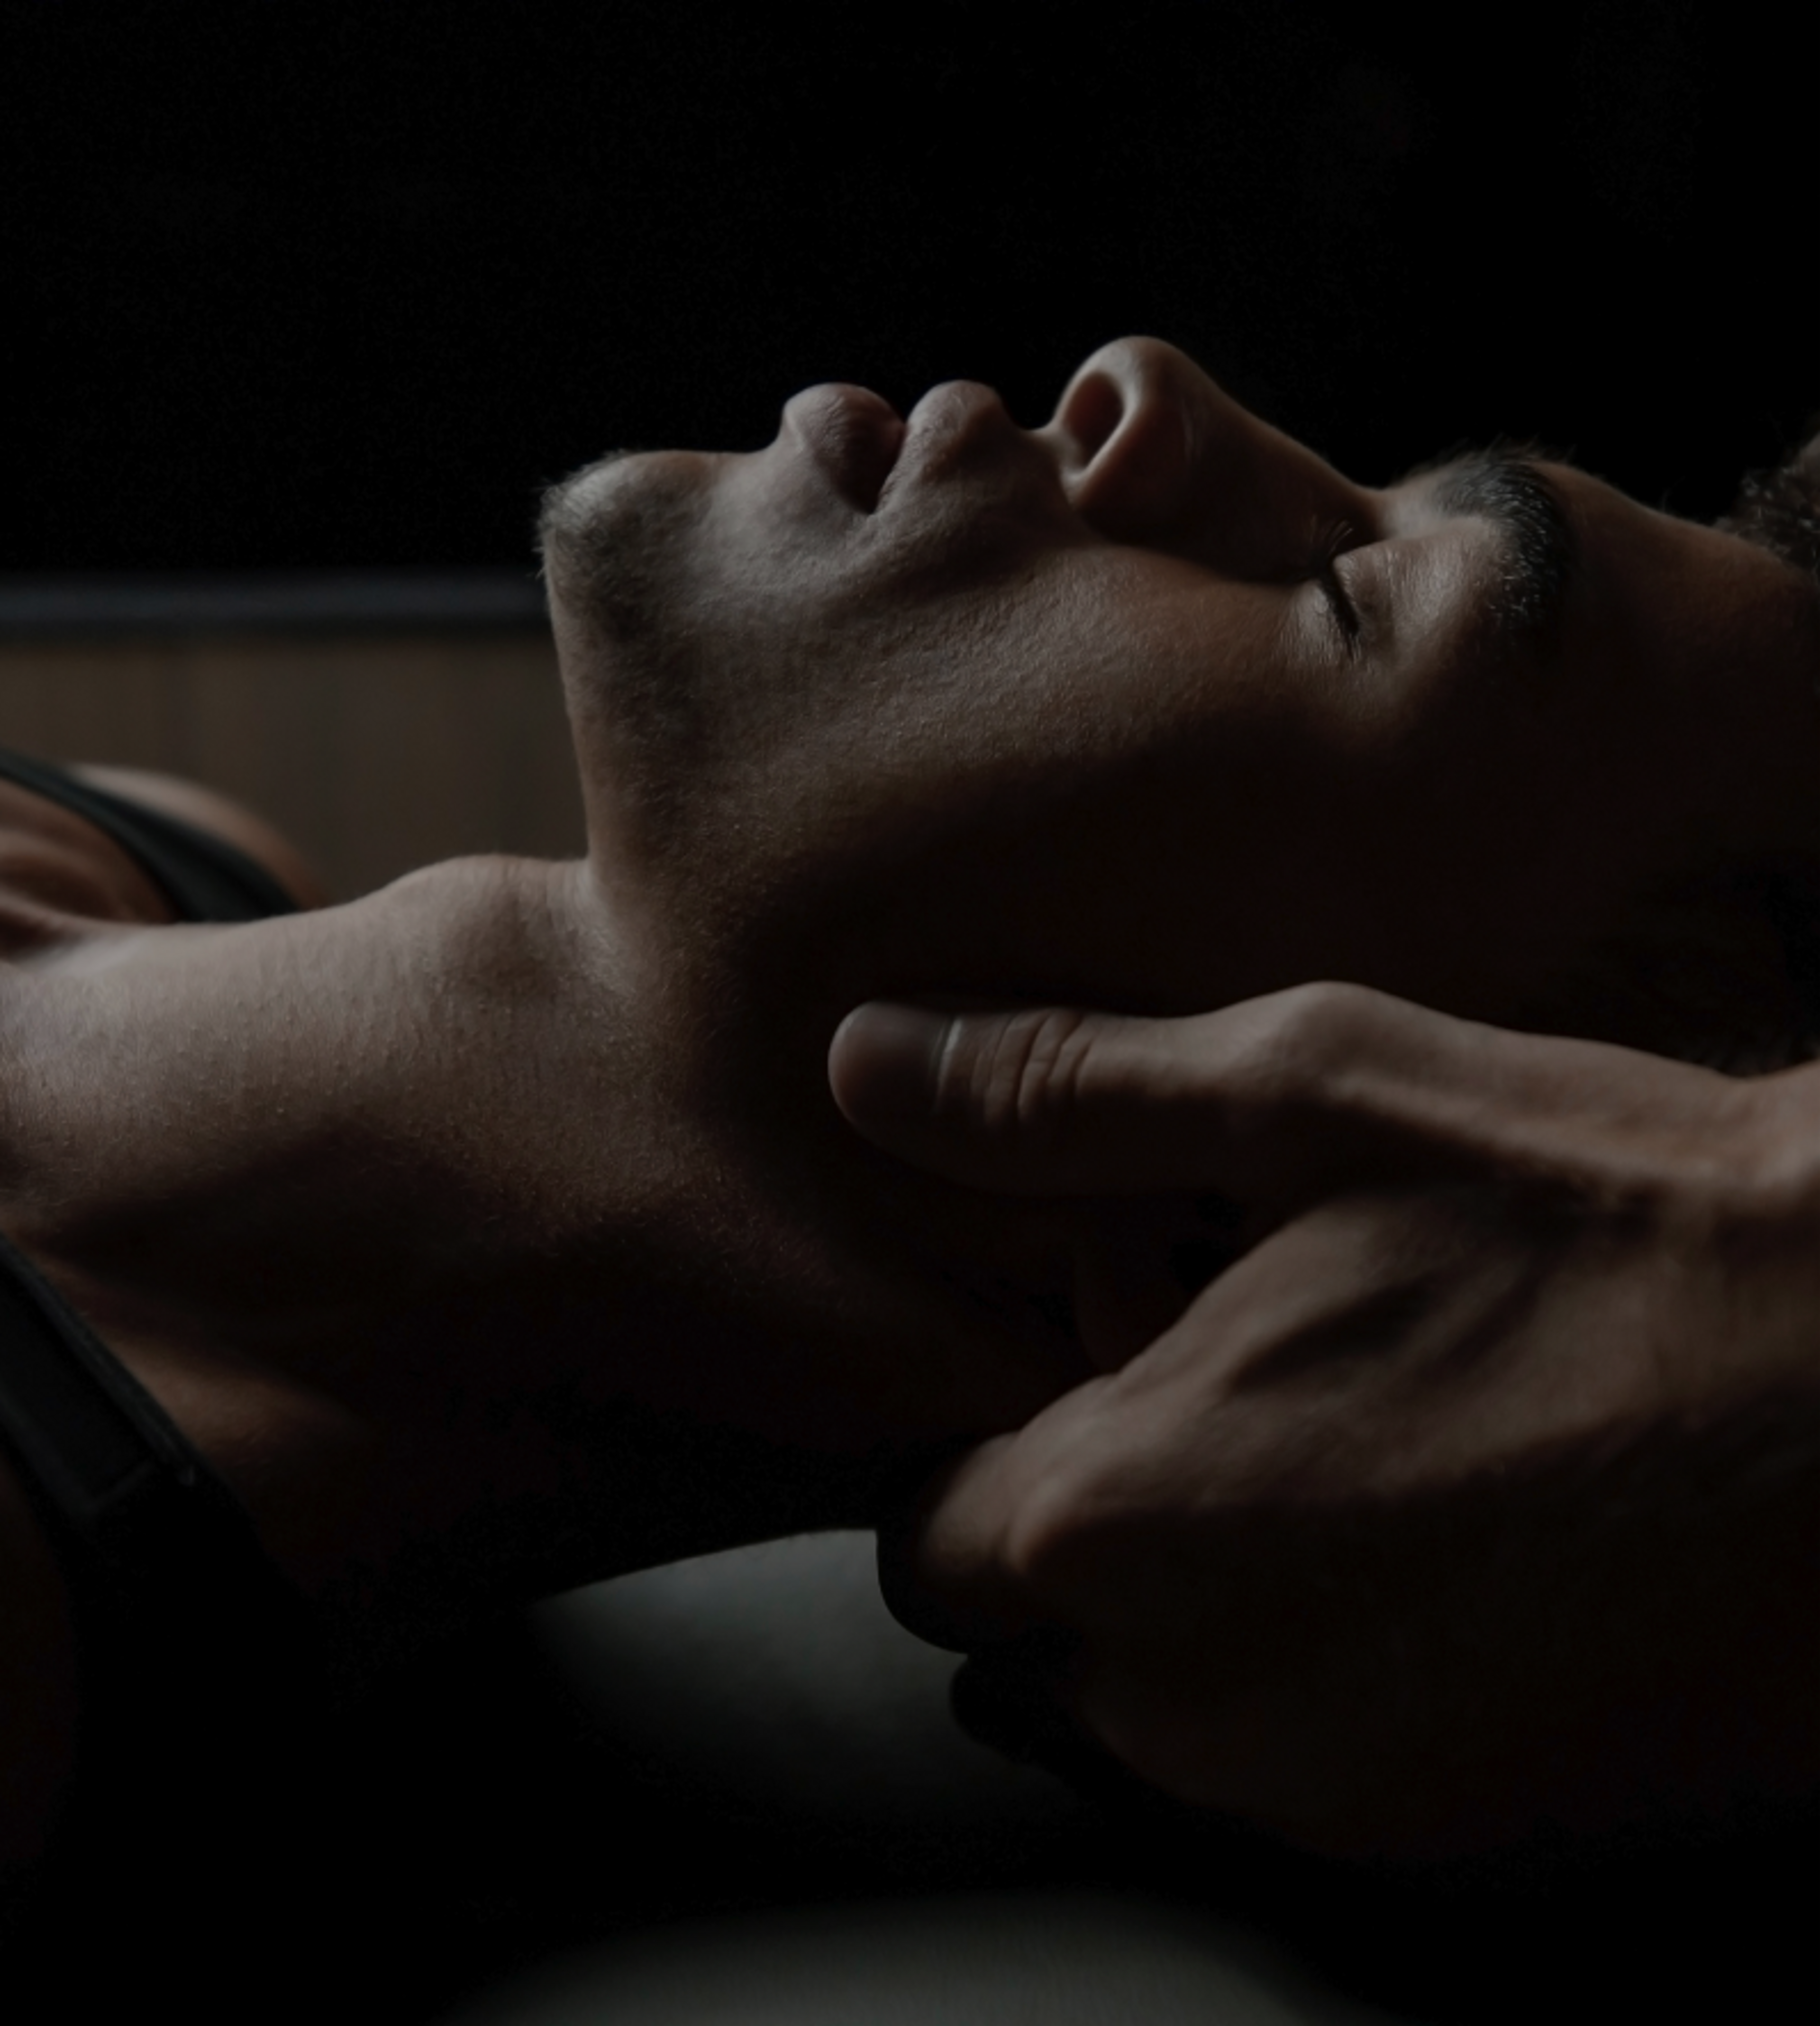 Close up of hands holding a man's head from behind while he lays on a table